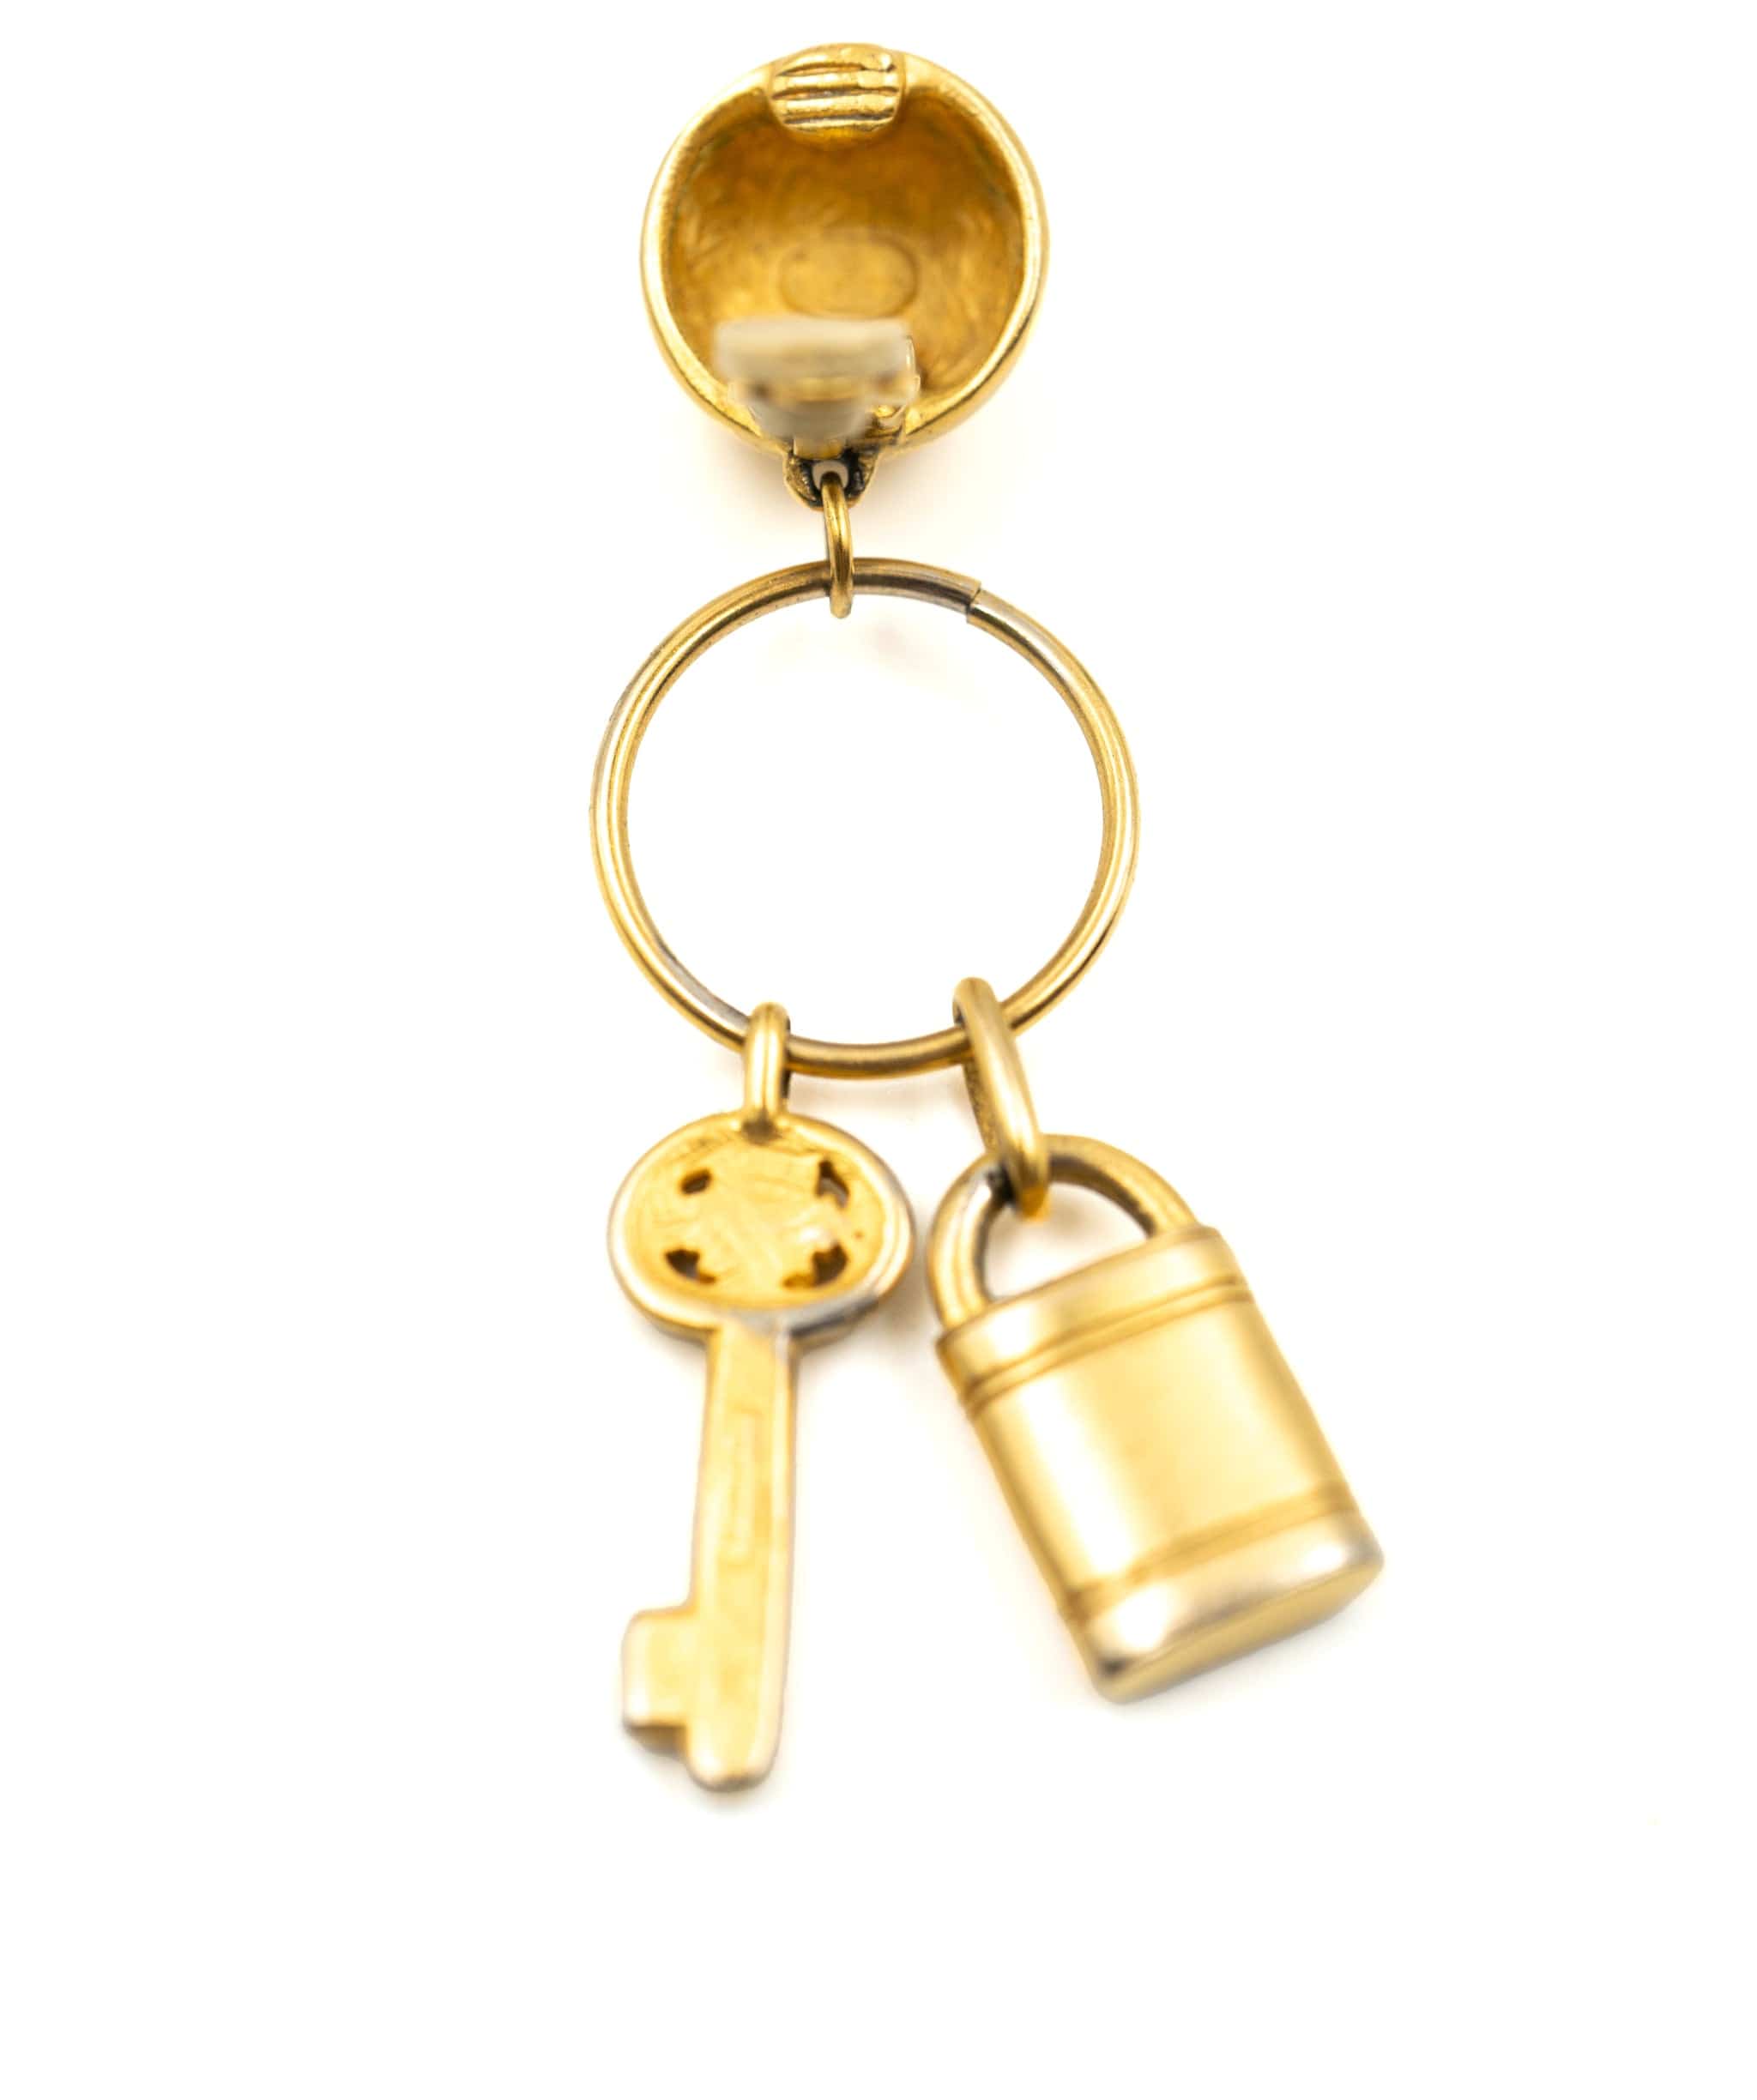 Givenchy Givenchy Vintage Key and Padlock Charm Clip on Earrings - AWL3599